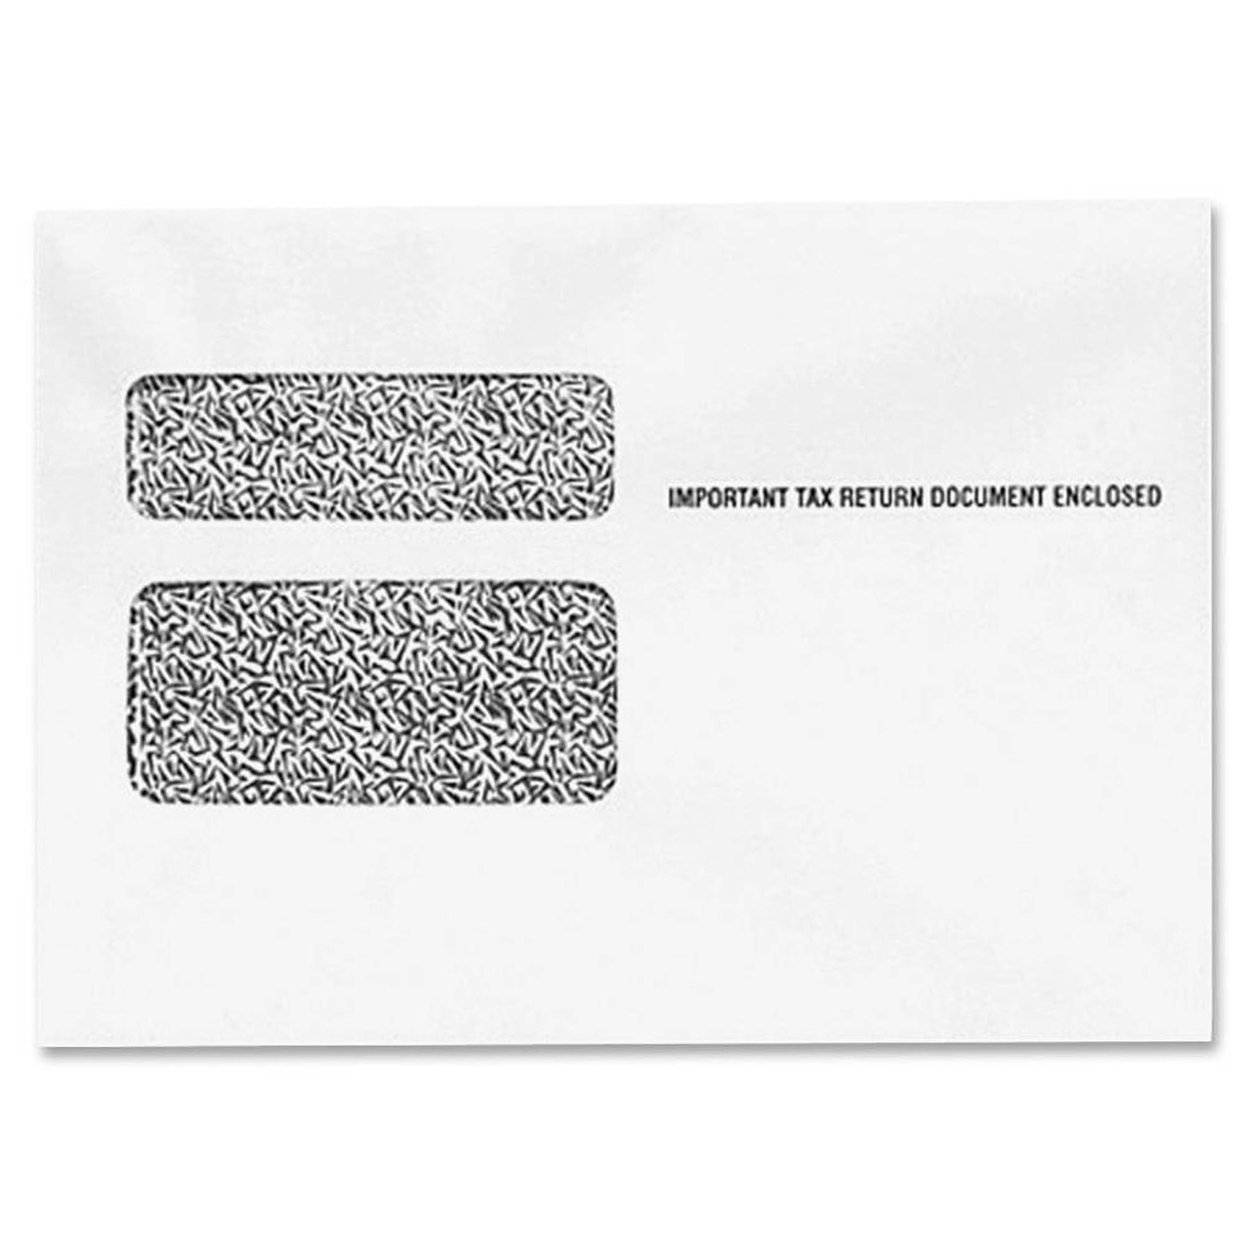 TOPS W-2 Form Double Window Envelopes - Double Window - 9 1by2"W x 5 5by8" L- 24 lb - Wove - White - image 1 of 2